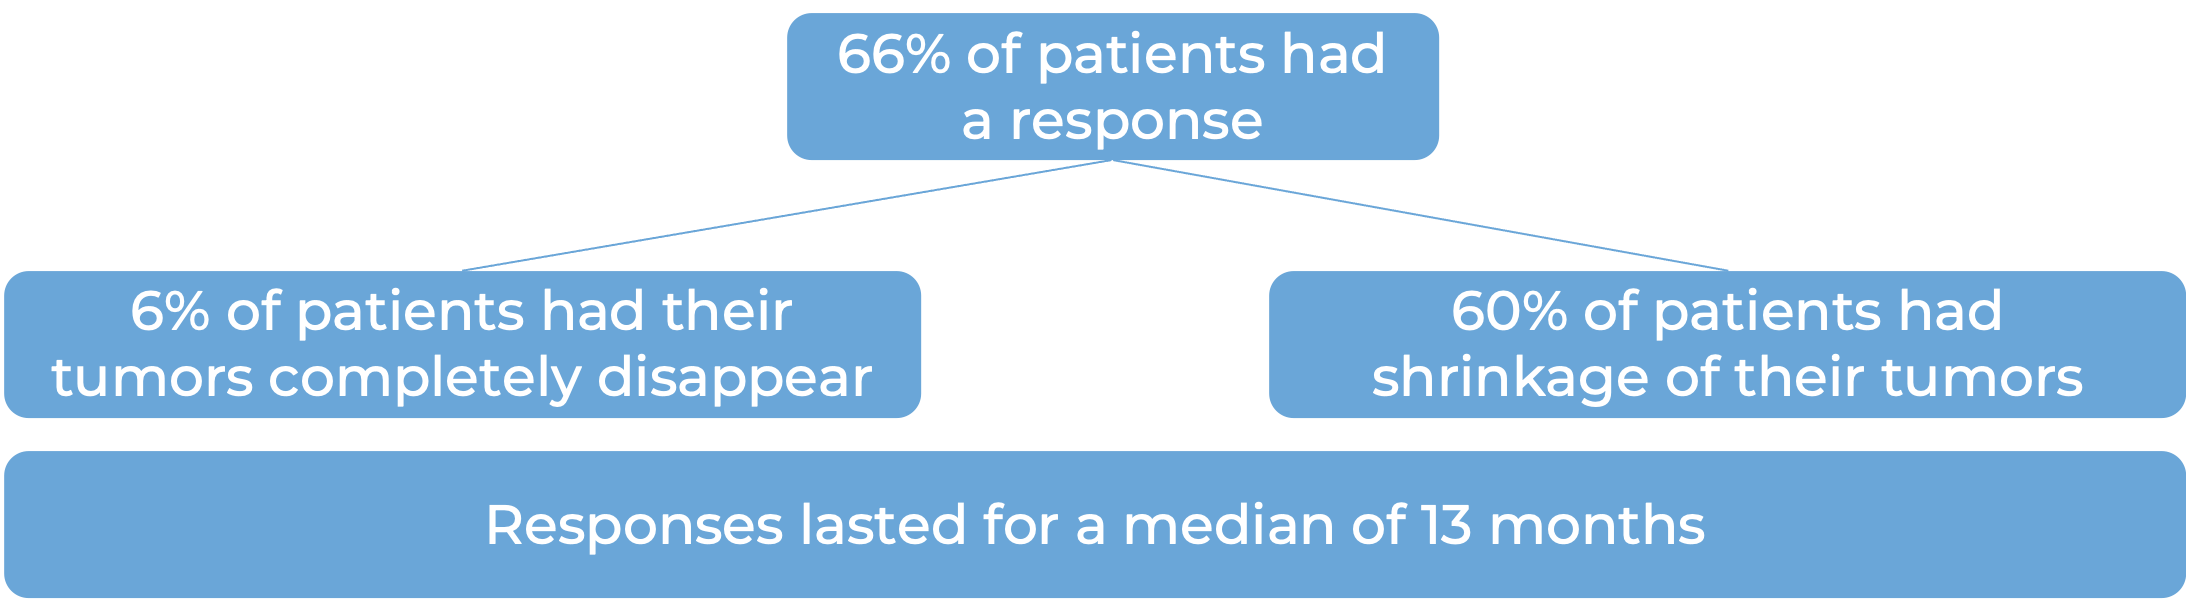 Results after treatment with Opdivo (diagram)